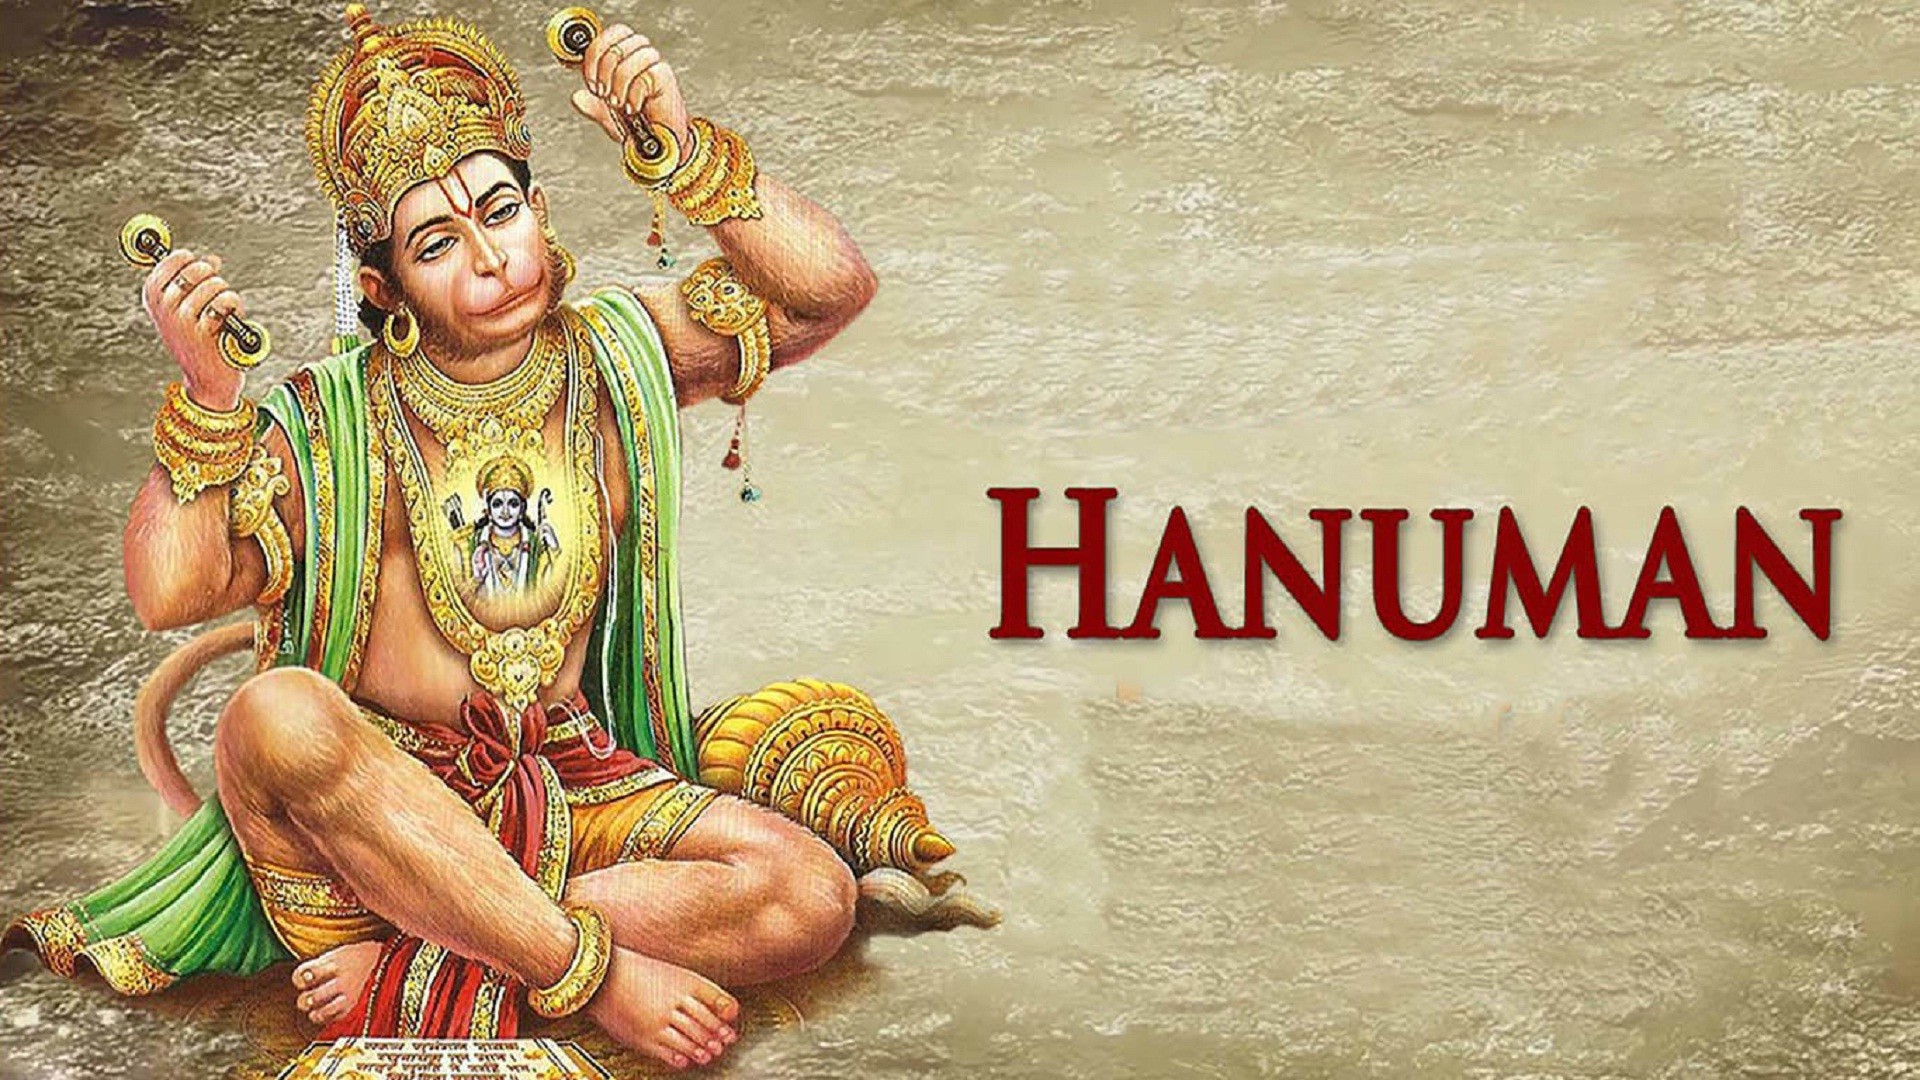 1920x1080 Hanuman full HD wide wallpapers and images